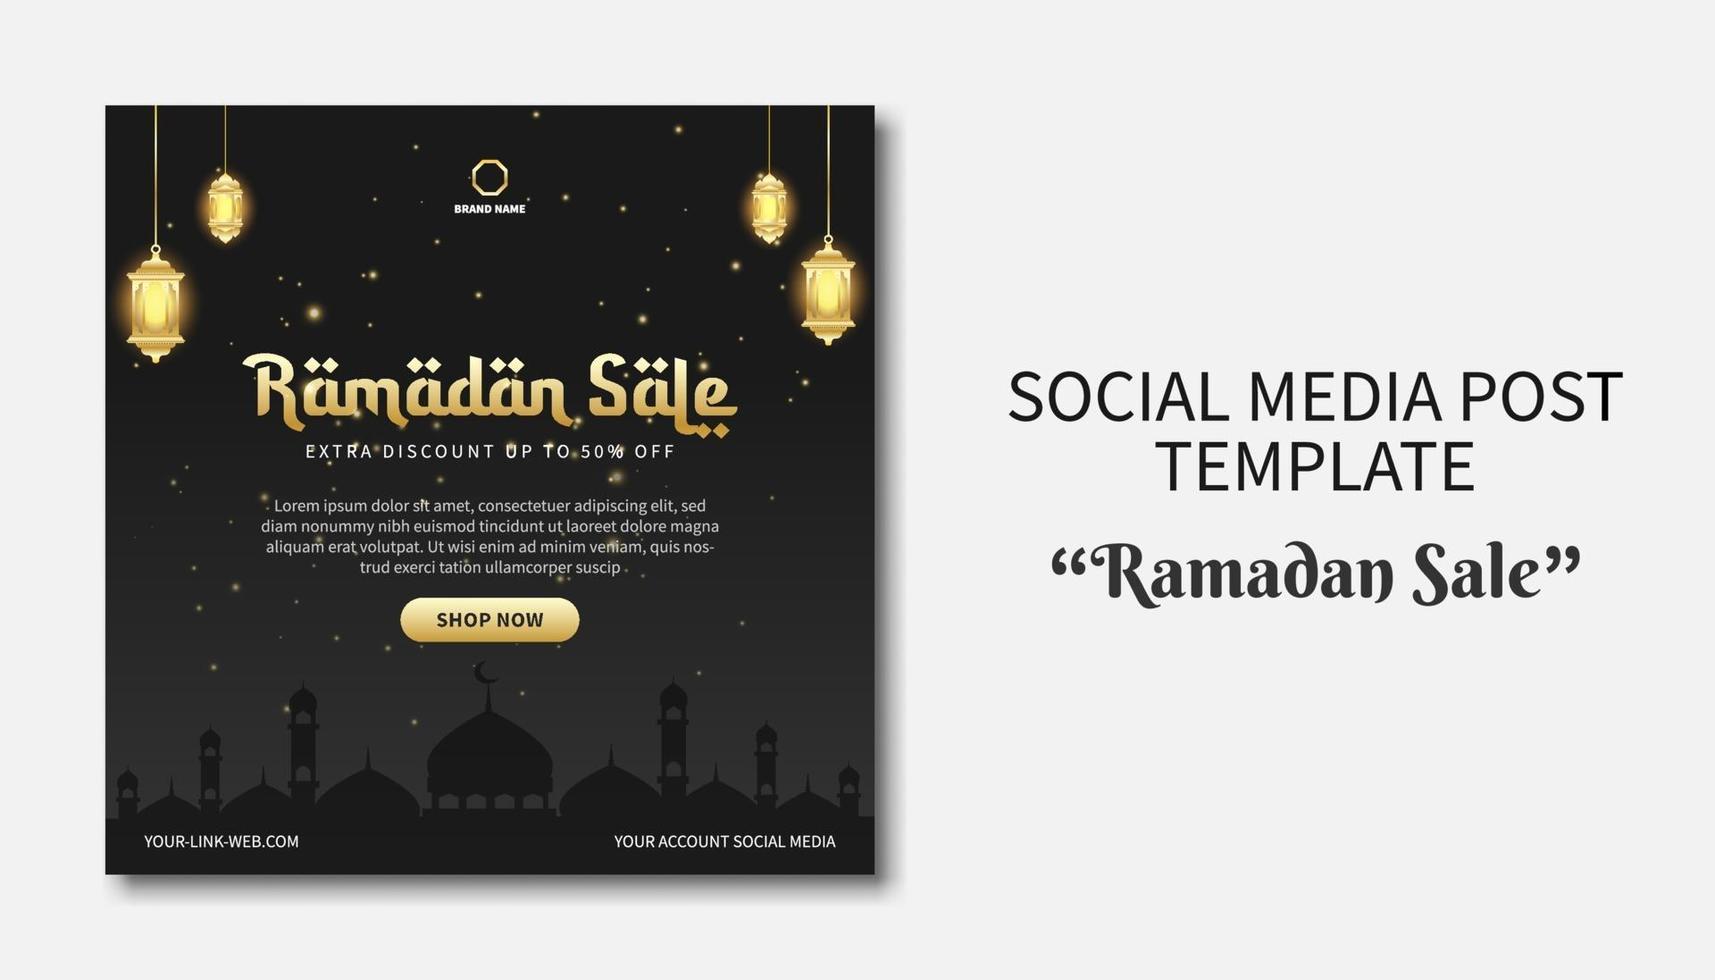 Ramadan sale social media post template. web promotion banner. Flyer design concept for greeting card, voucher, social media post template for islamic event vector